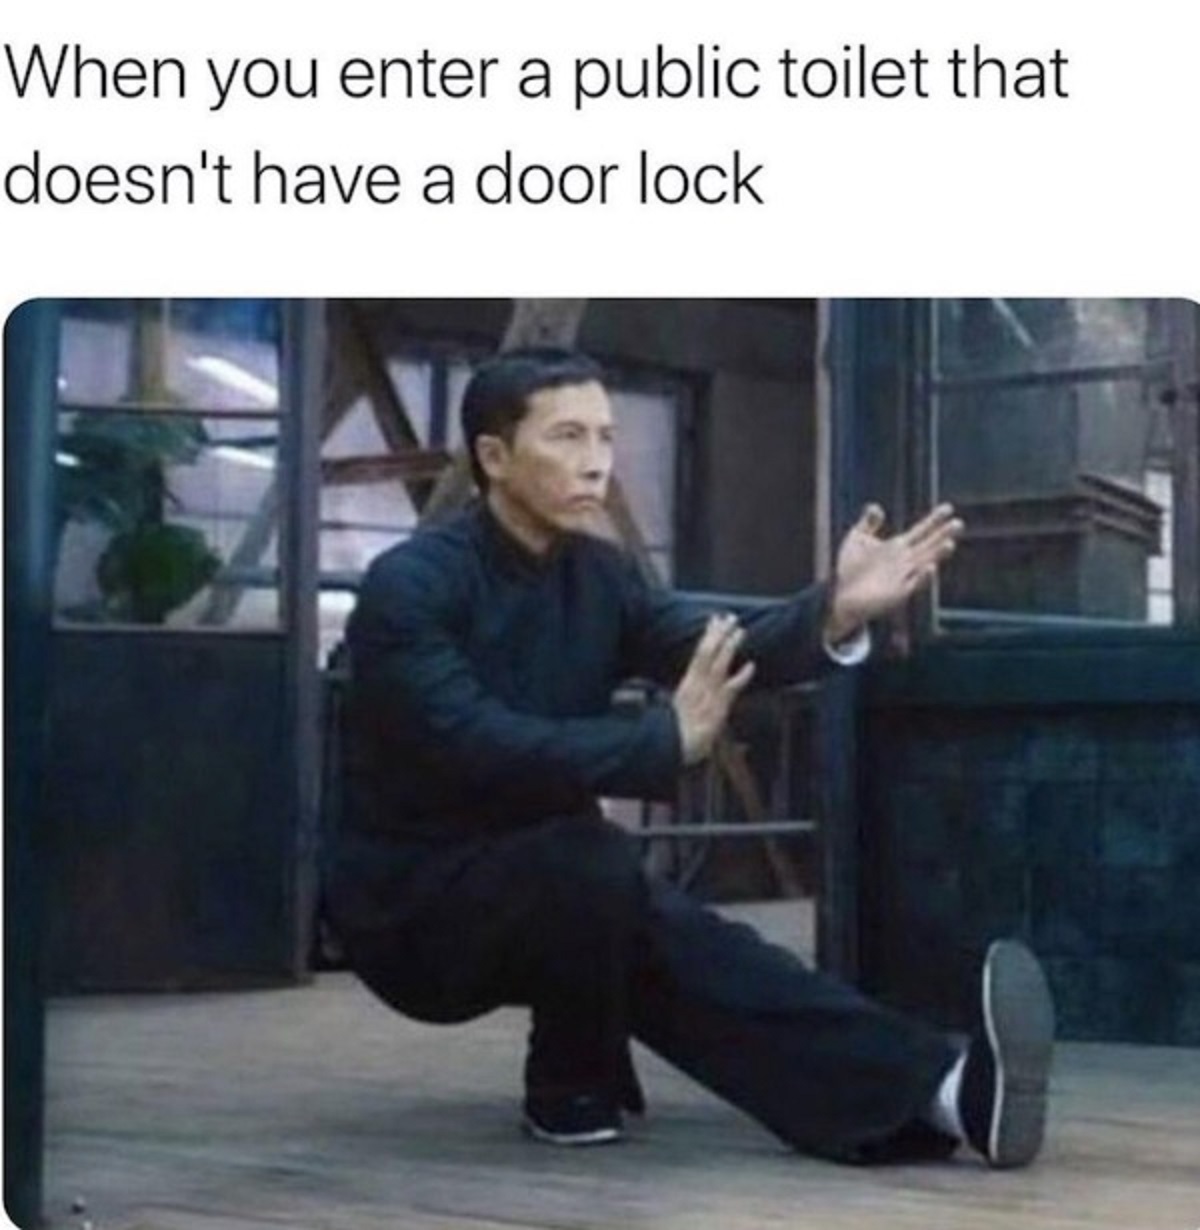 photo caption - When you enter a public toilet that doesn't have a door lock